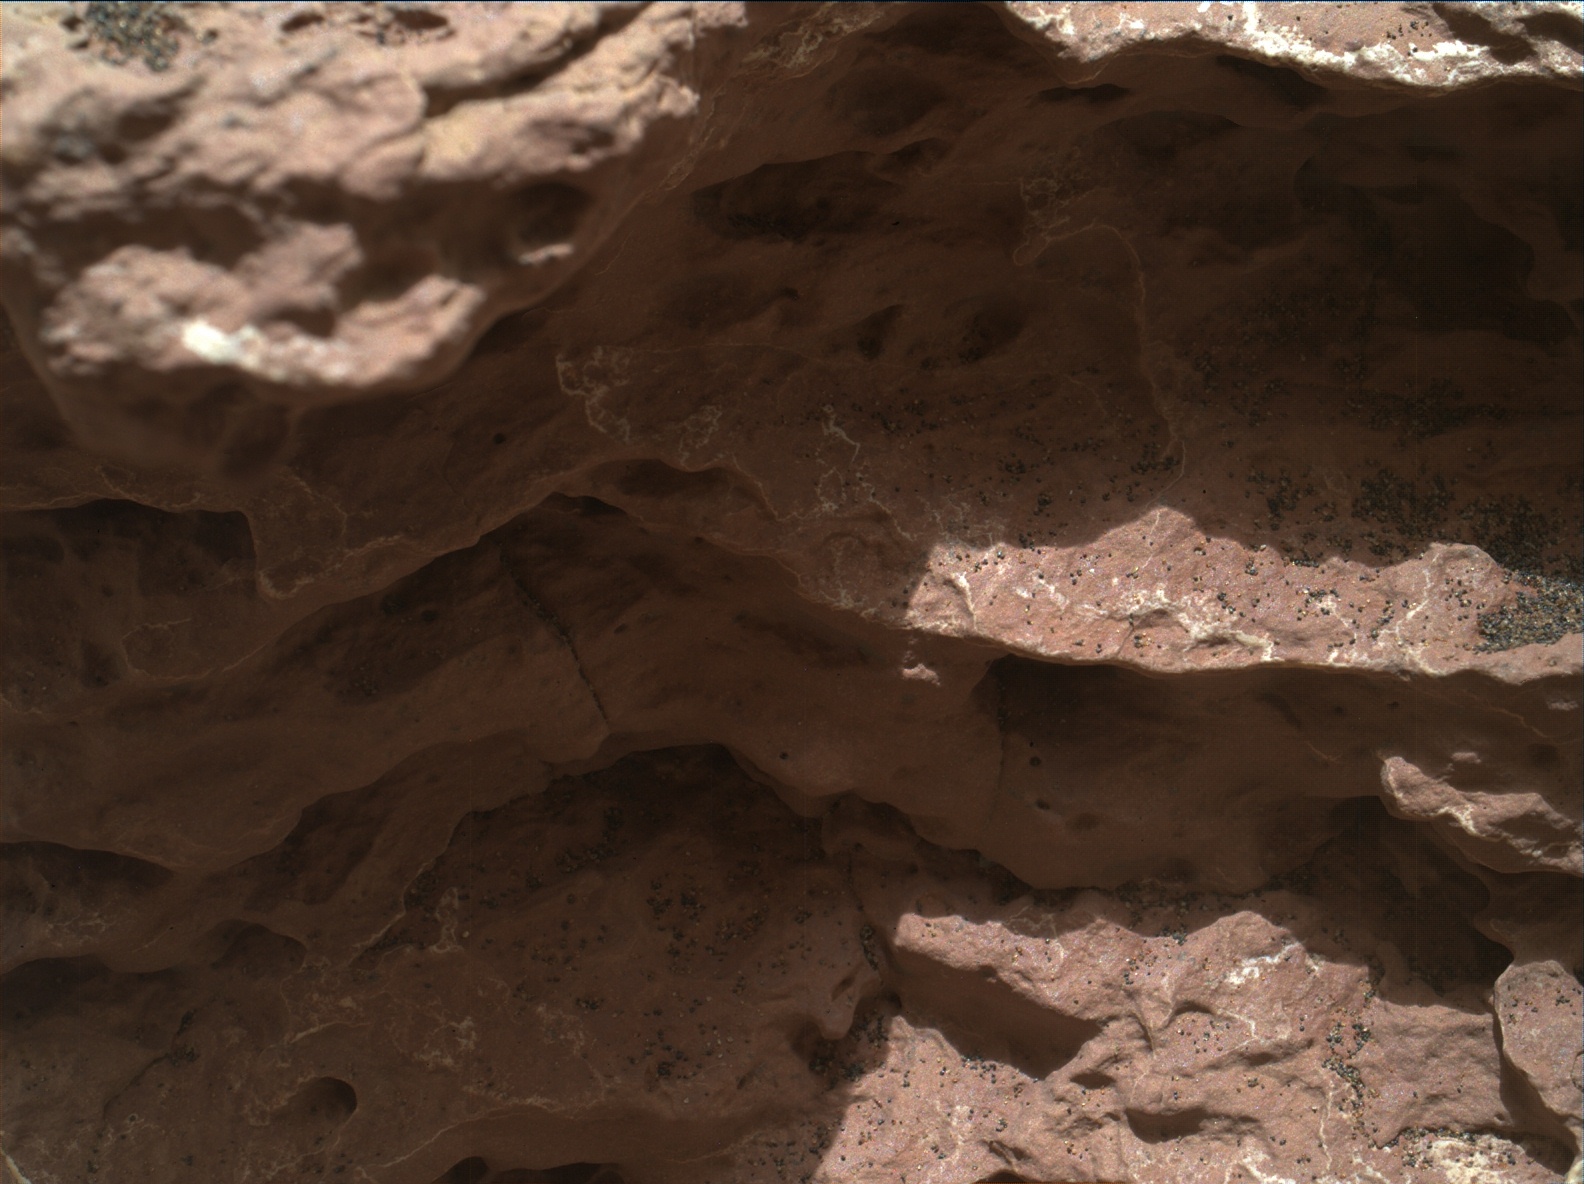 Nasa's Mars rover Curiosity acquired this image using its Mars Hand Lens Imager (MAHLI) on Sol 1578